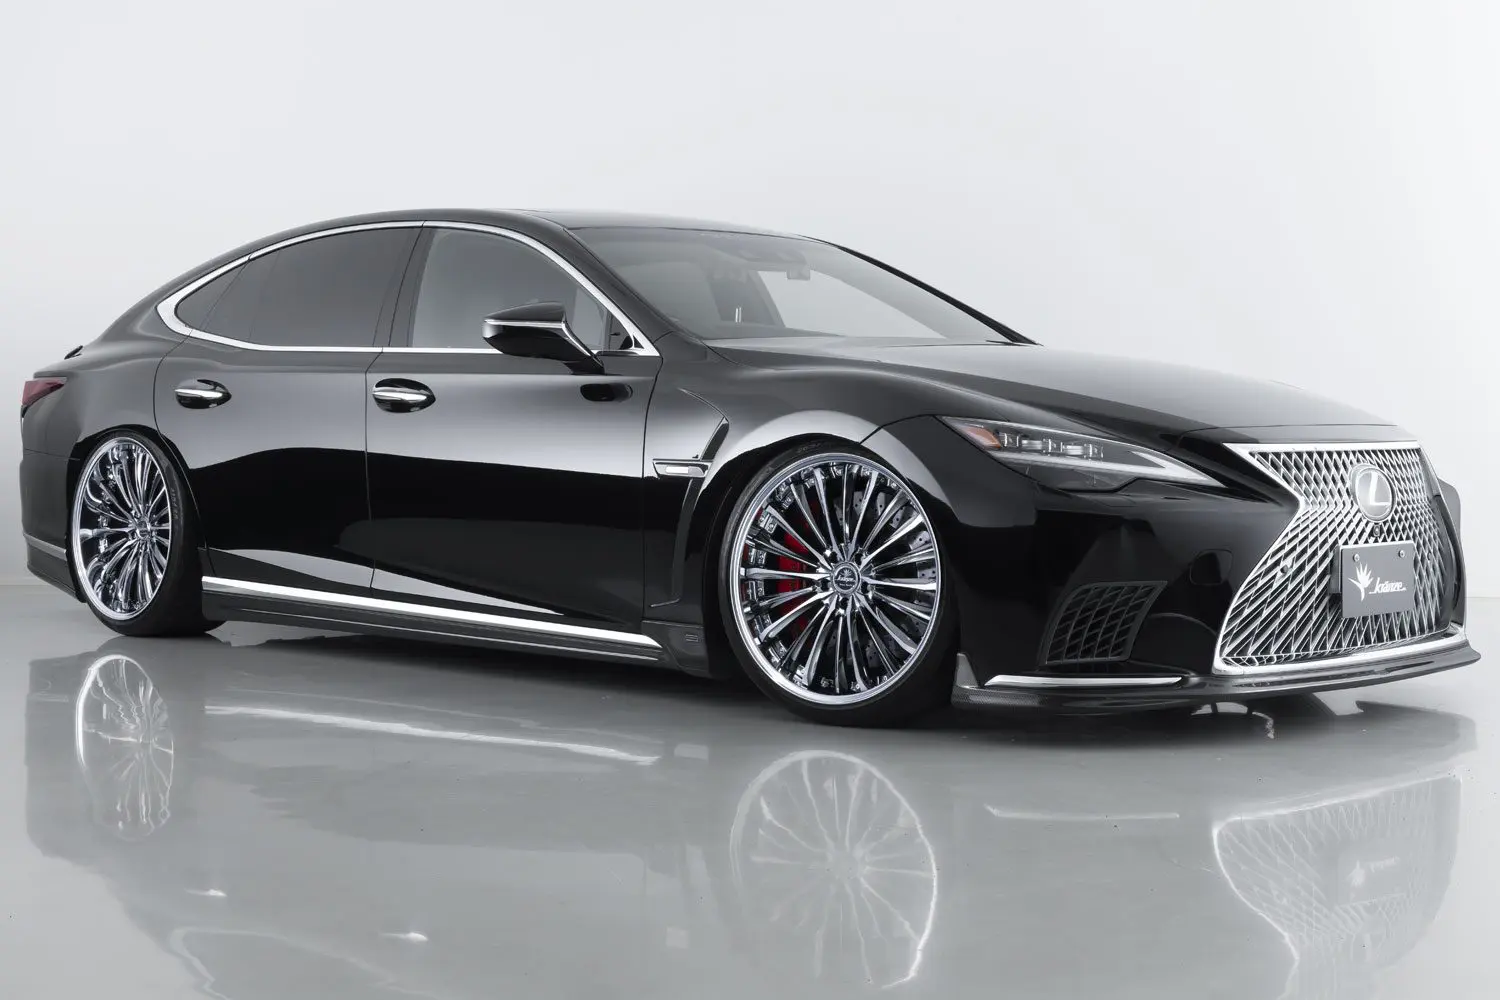 The black lexus ls is parked in a studio.